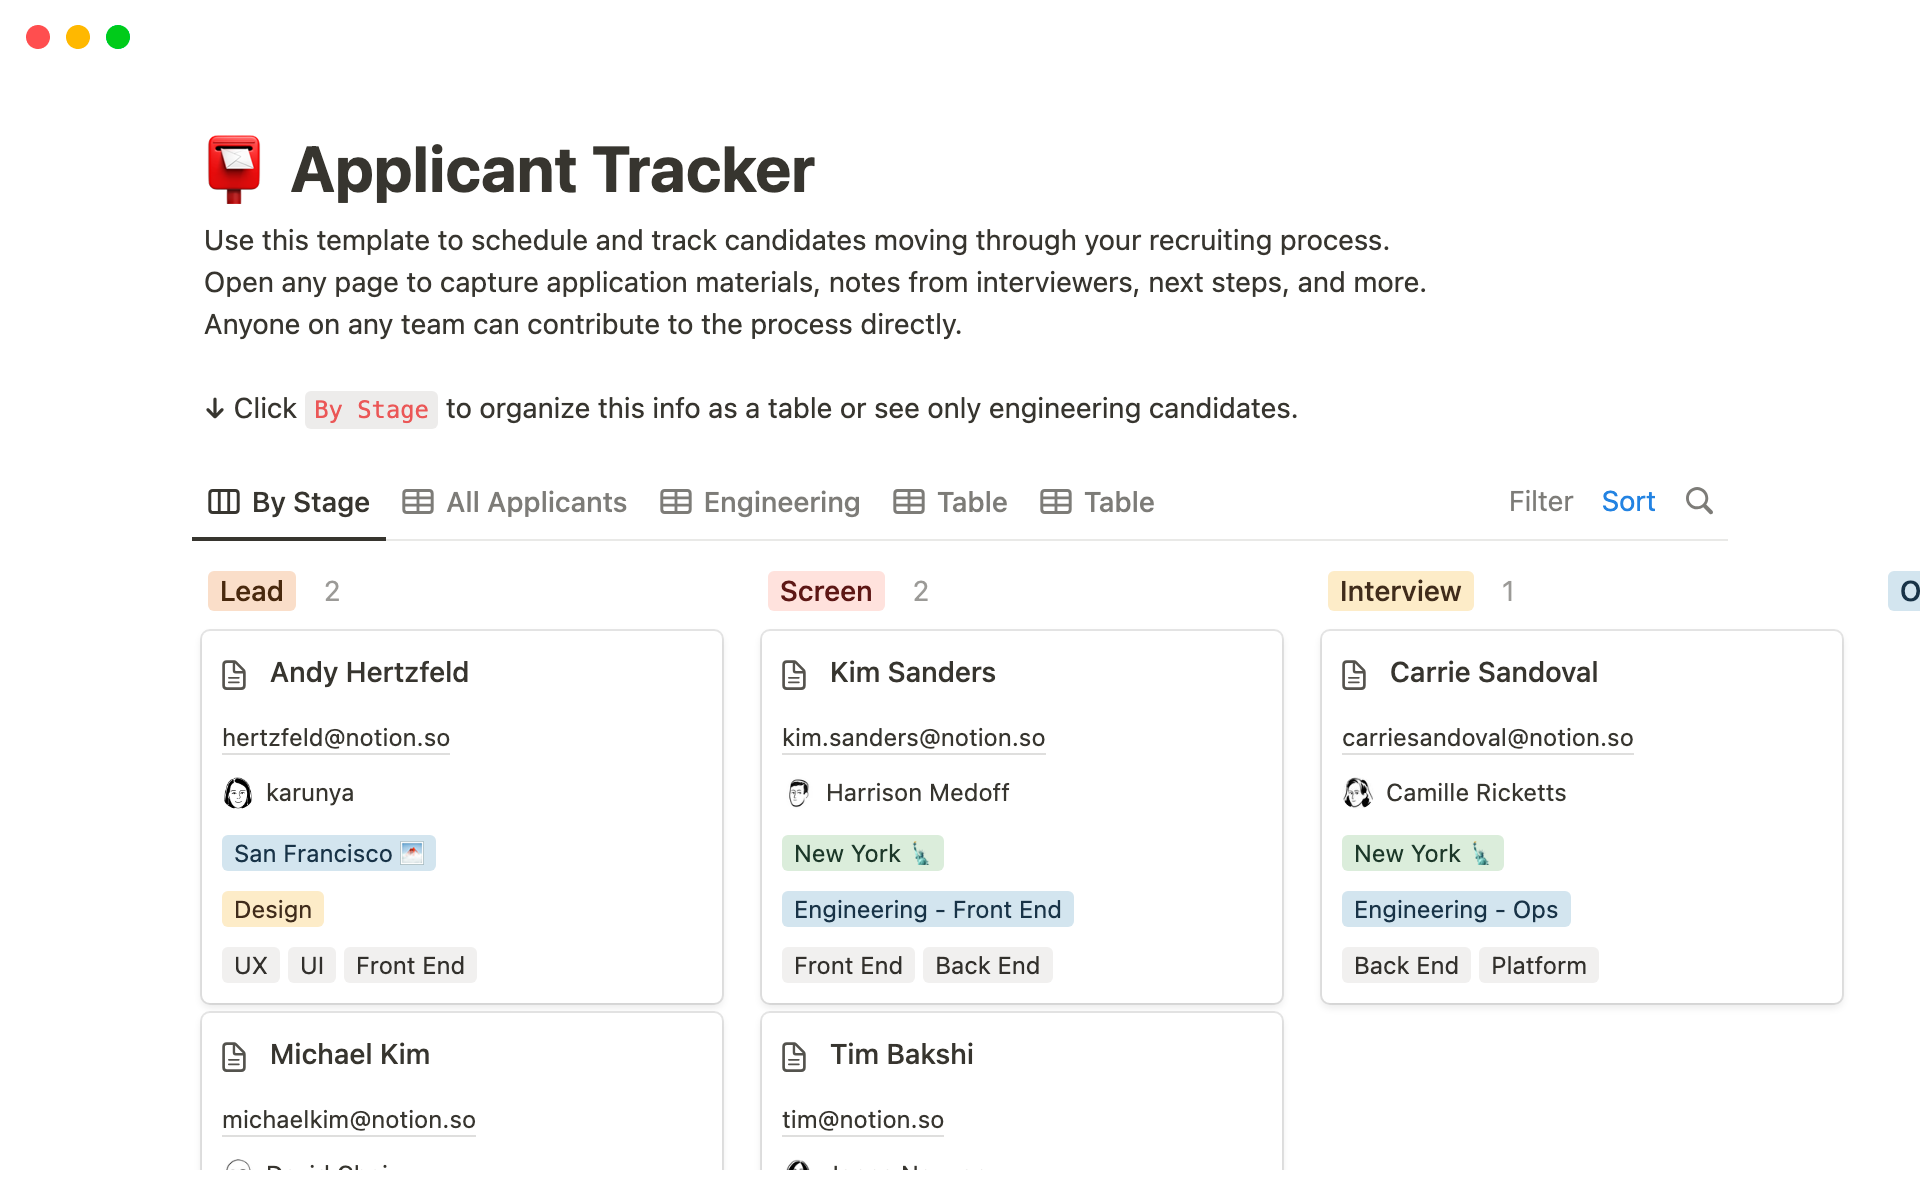 Plan and track candidates in your hiring process. Record application materials, interviewer notes, next steps and more.